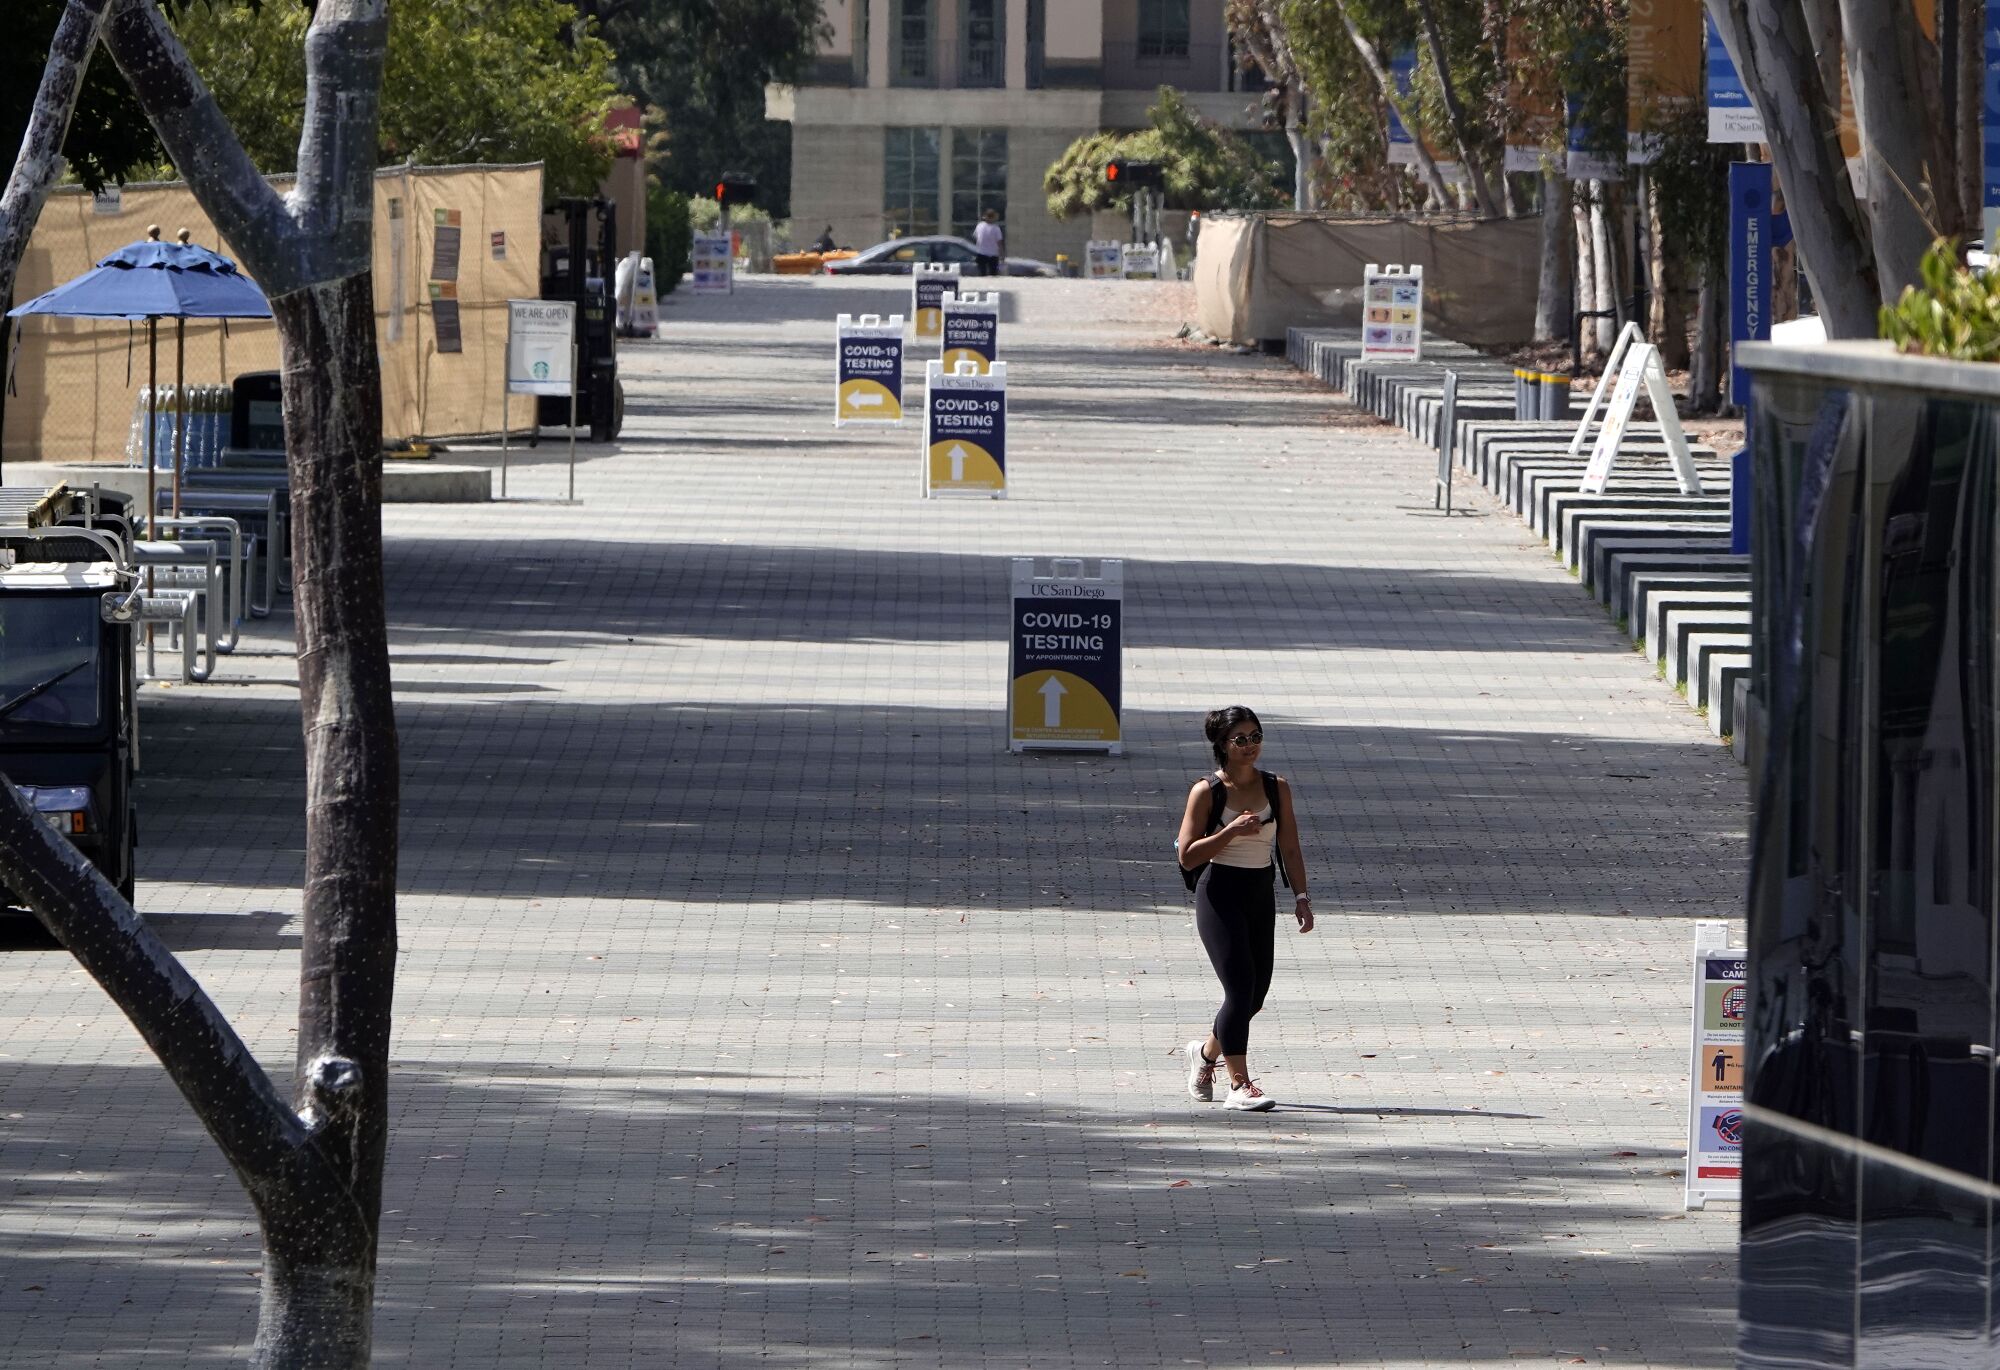 UCSD was largely a ghost town in August due to restrictions arising from the coronavirus pandemic.